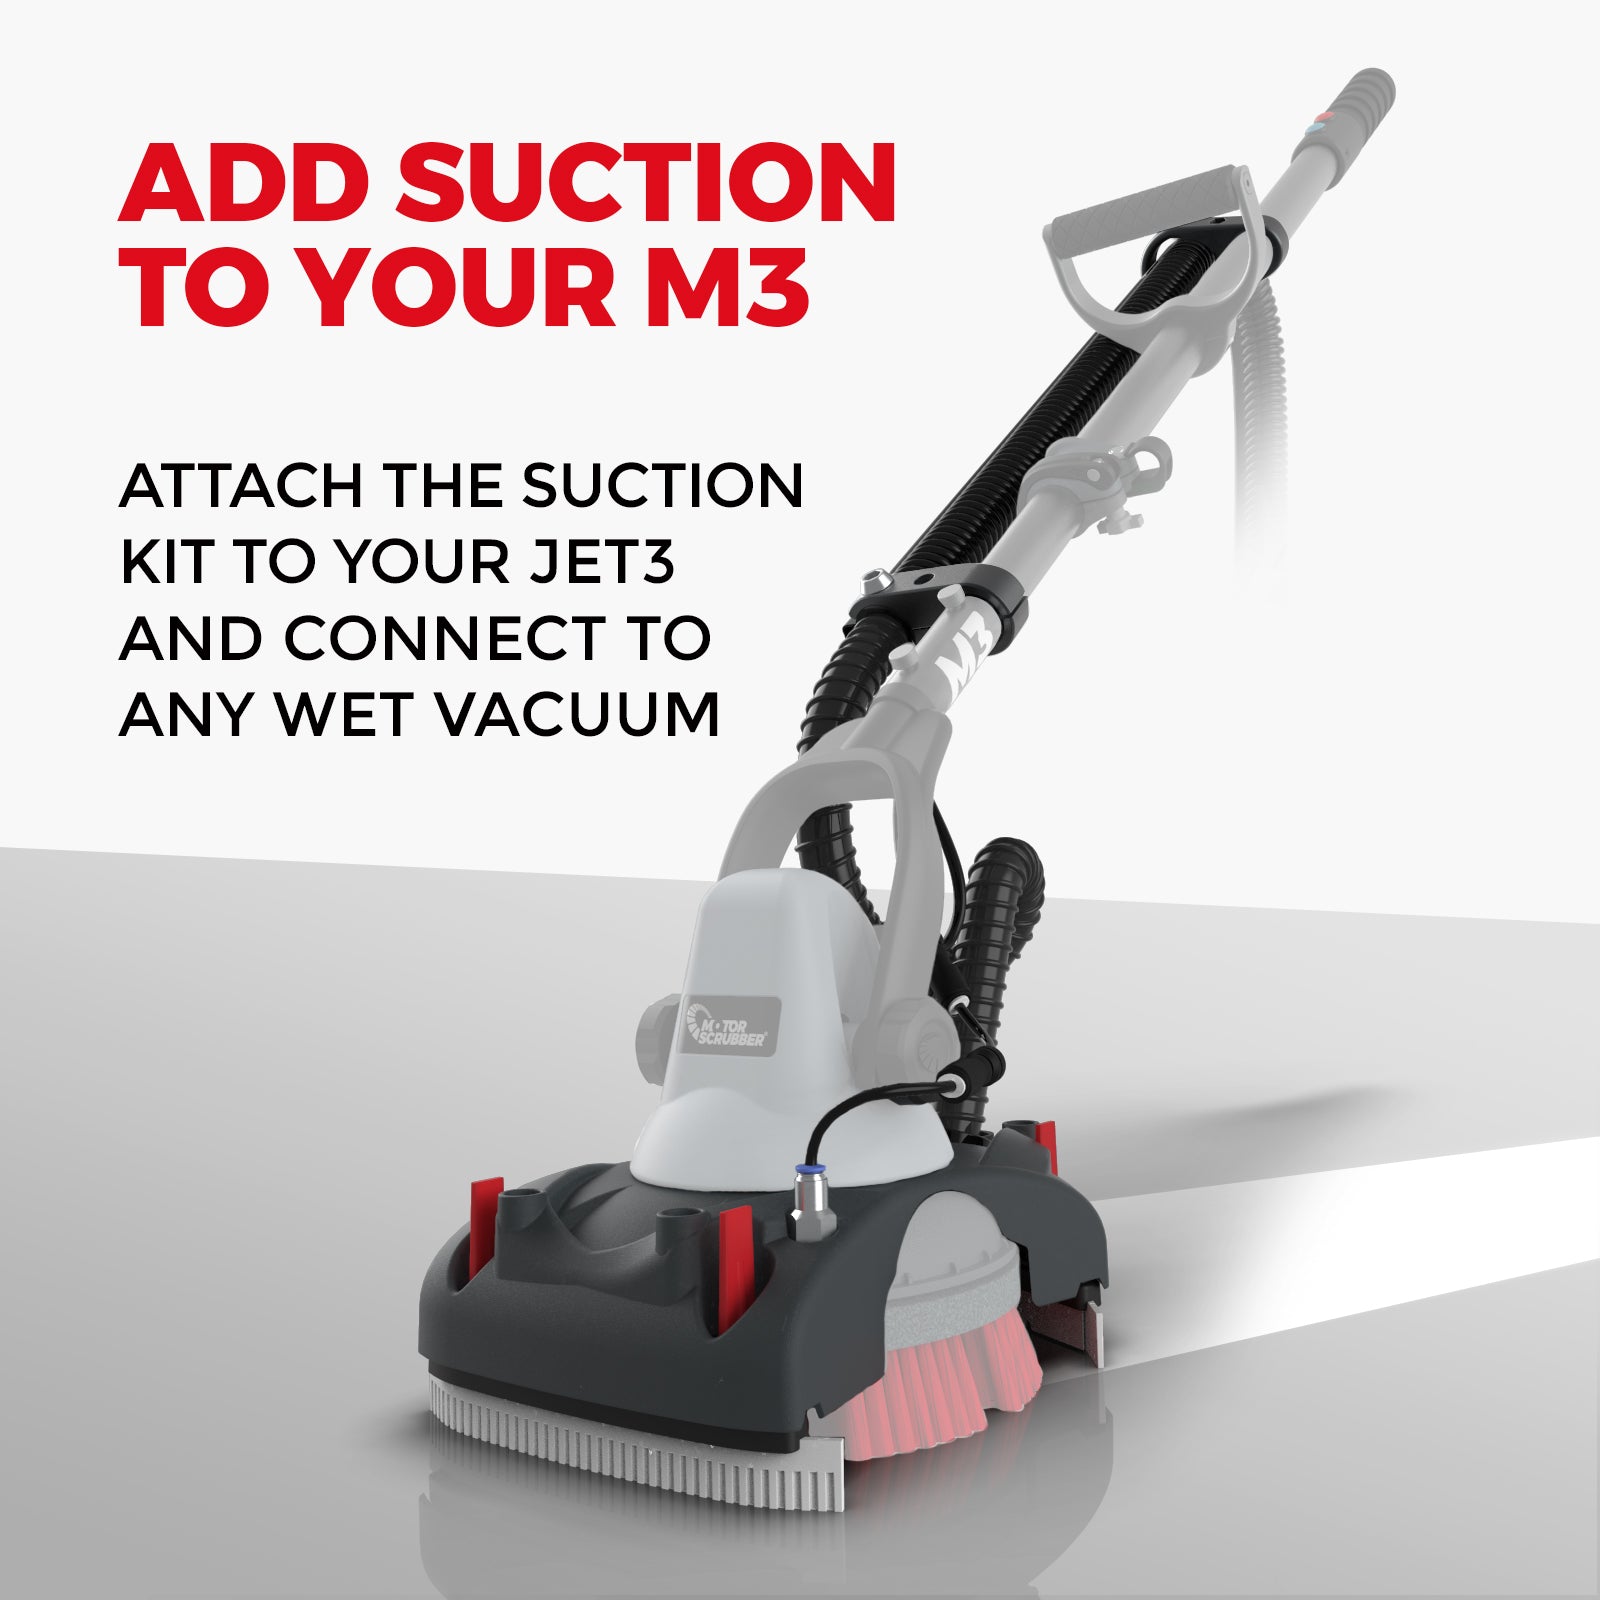 Add suction to M3